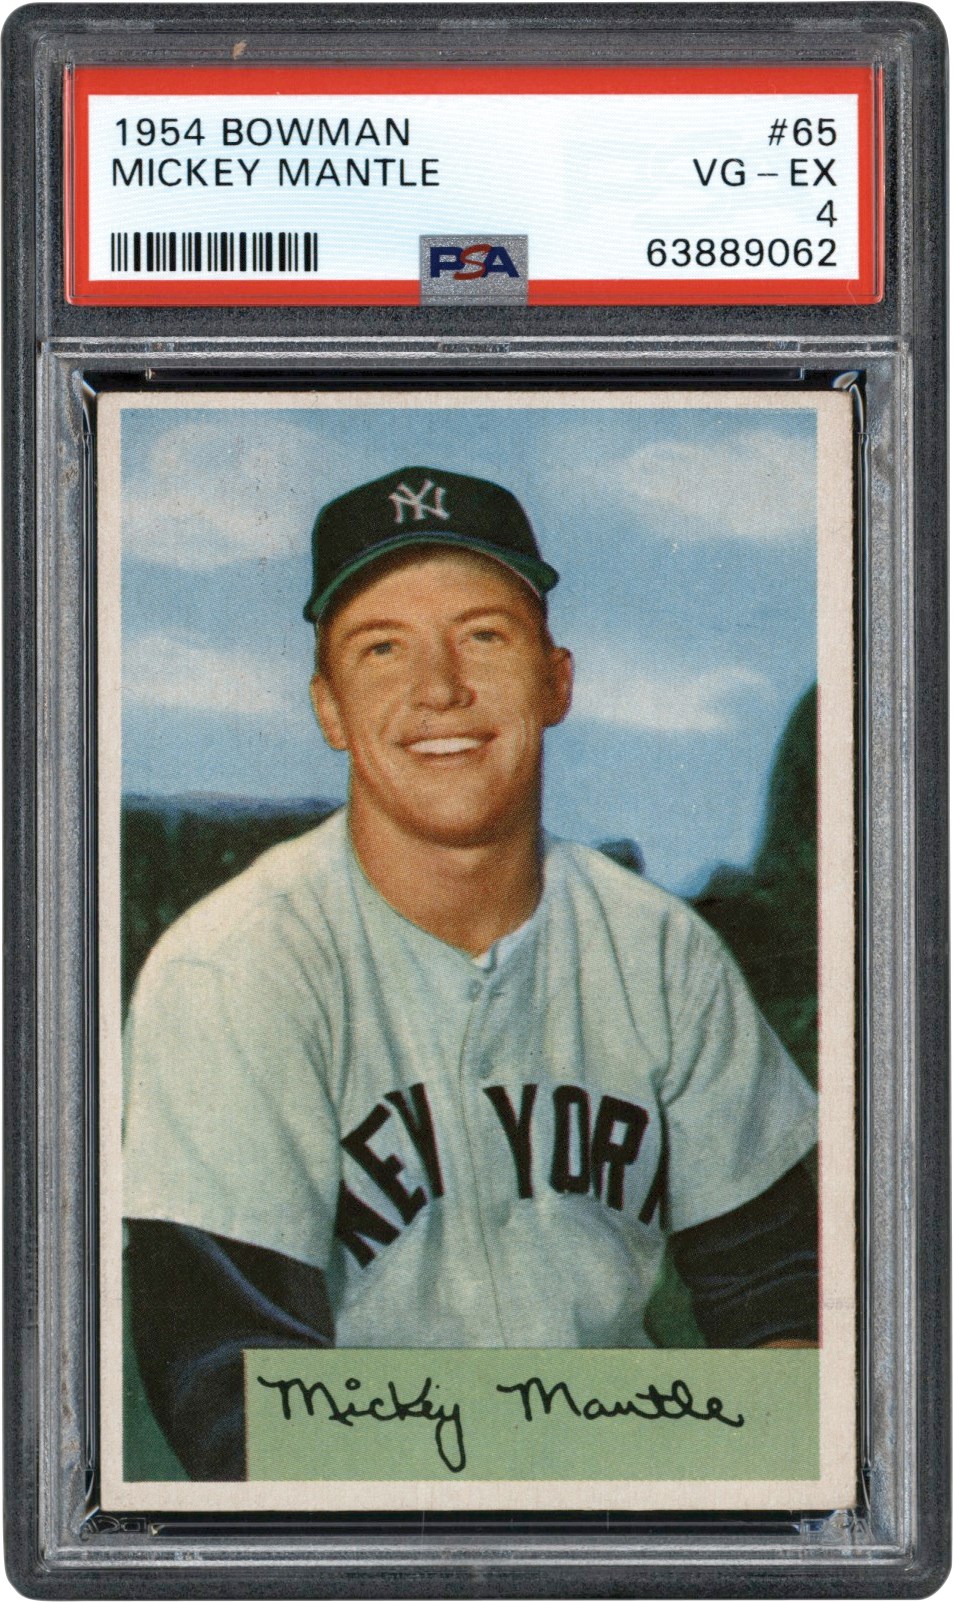 - 1954 Bowman #65 Mickey Mantle PSA VG-EX 4 - Newly Discovered Example